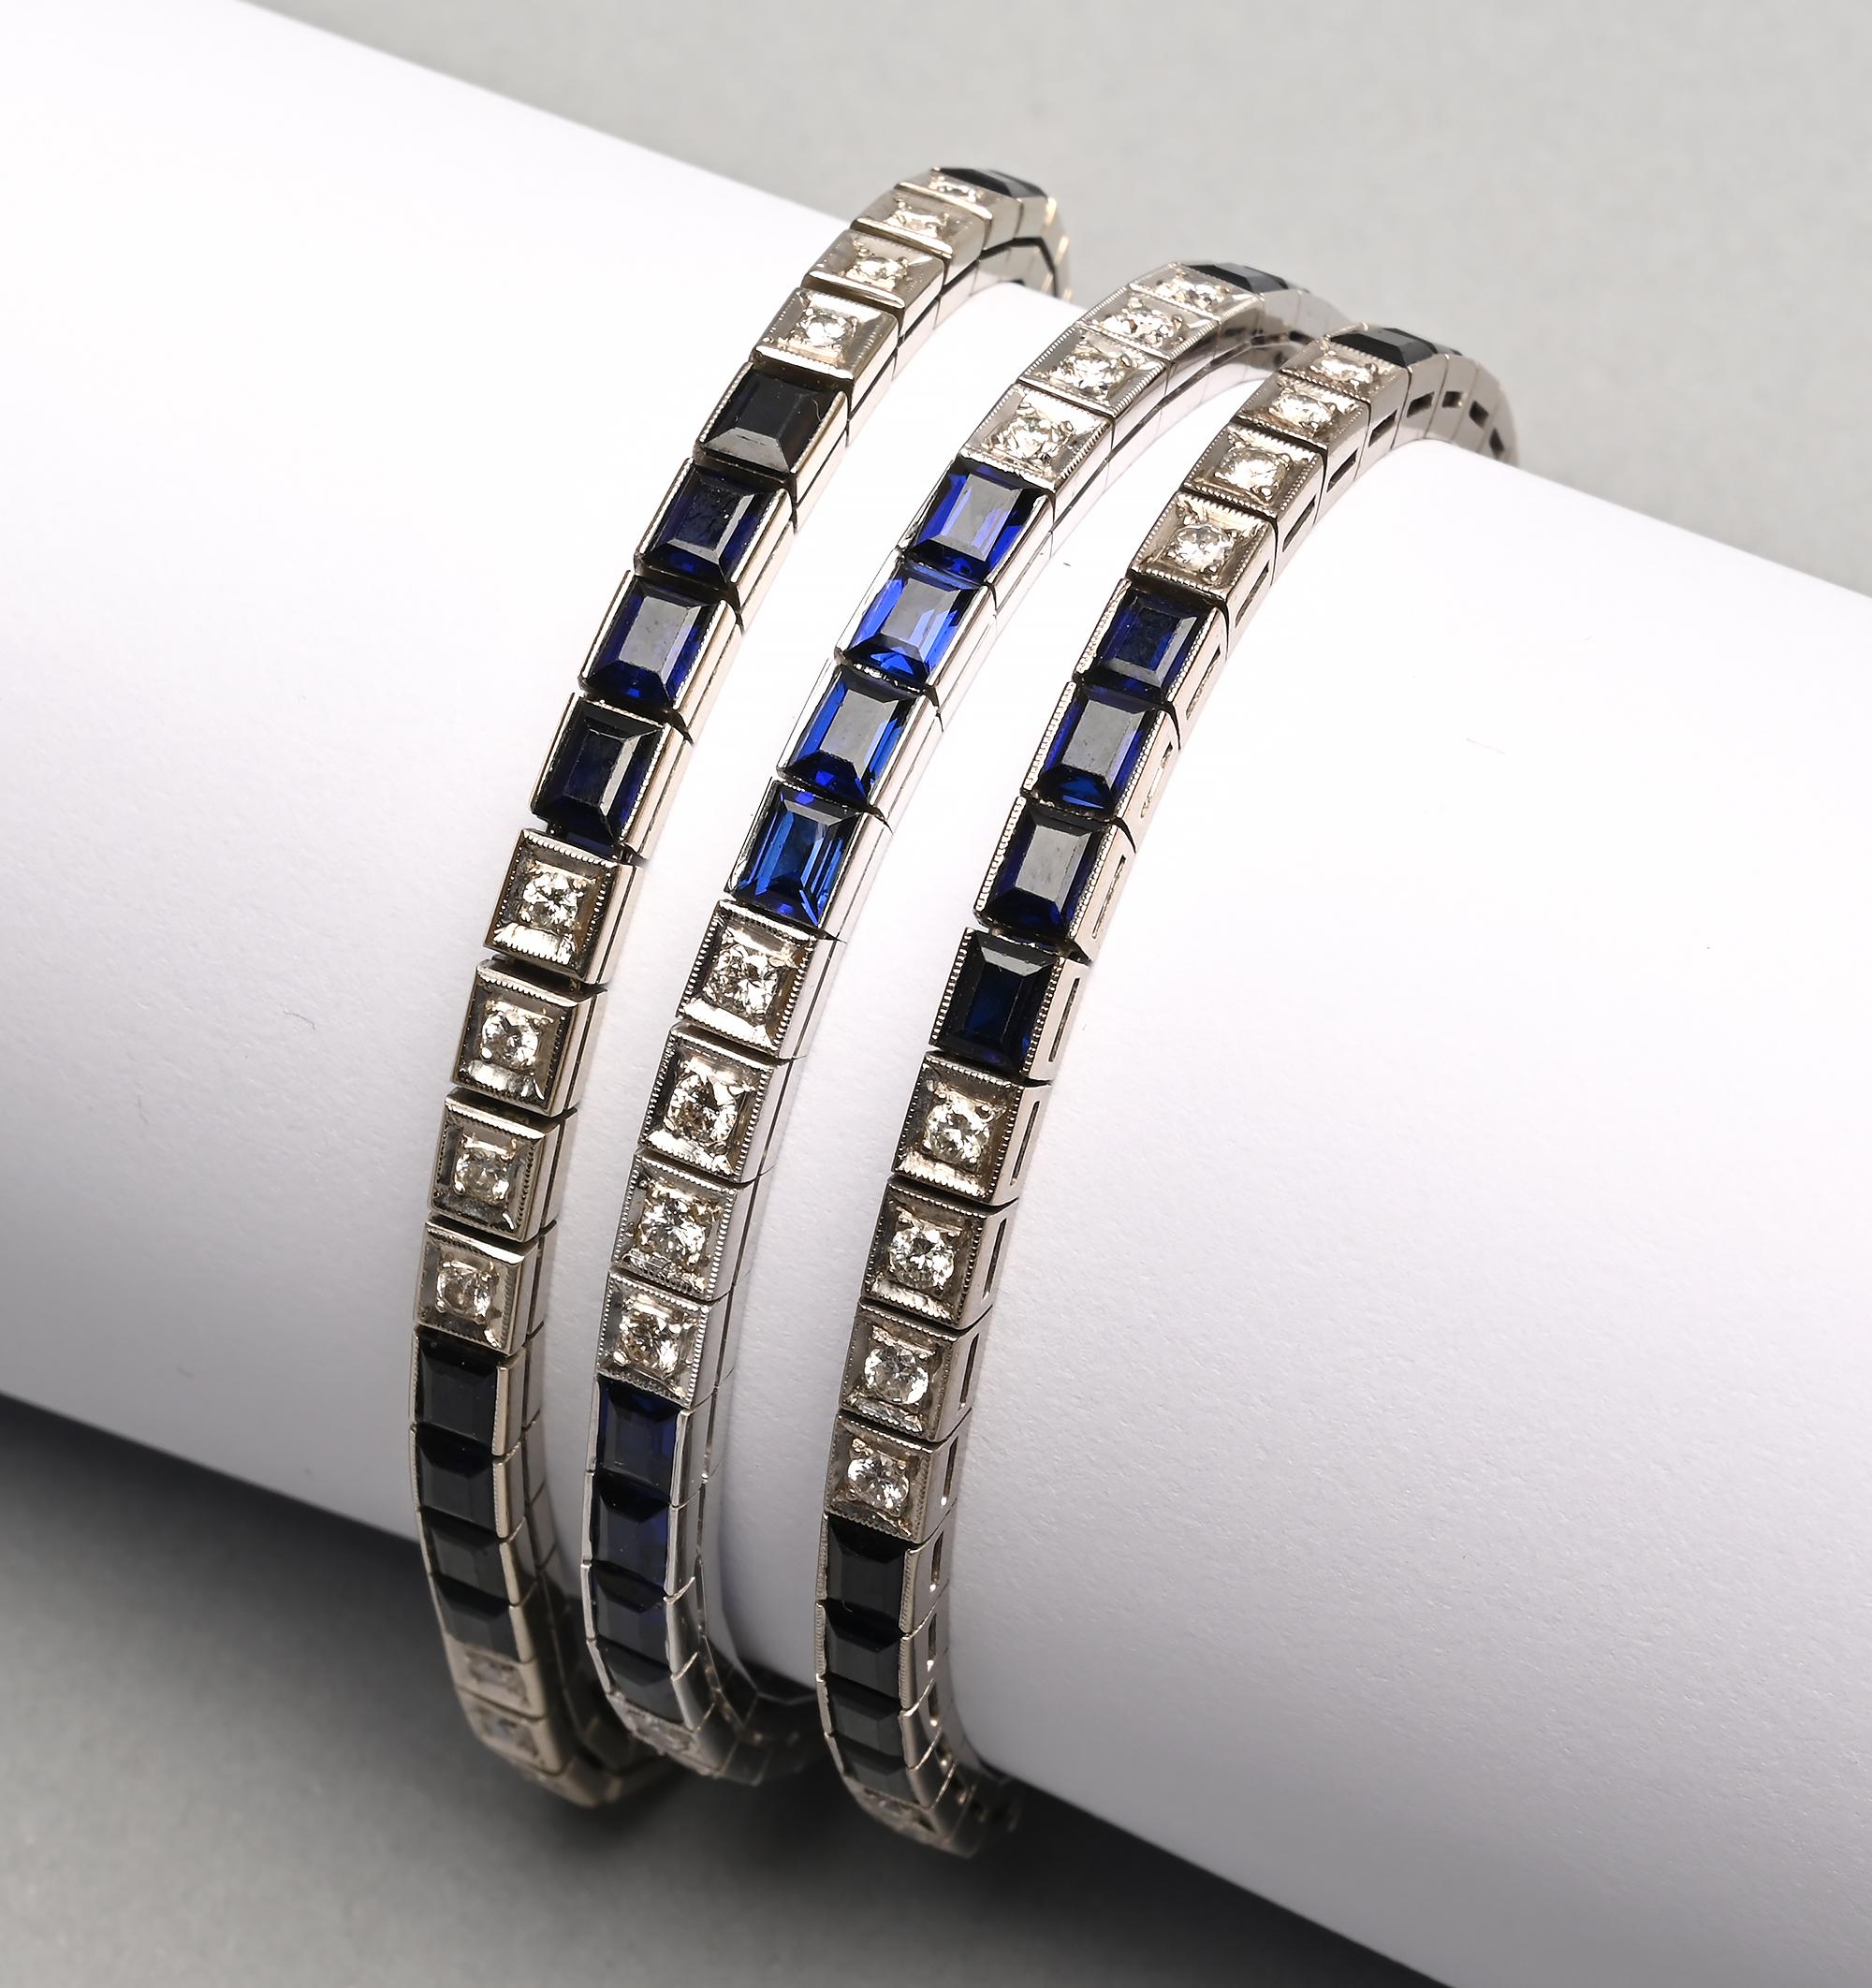 A trio of Deco straight line bracelets can be worn in various configurations. Each bracelet alternates four sapphires with four diamonds. The lengths vary from slightly more than 7 inches to slightly less than 8 inches.  Each bracelet has a push